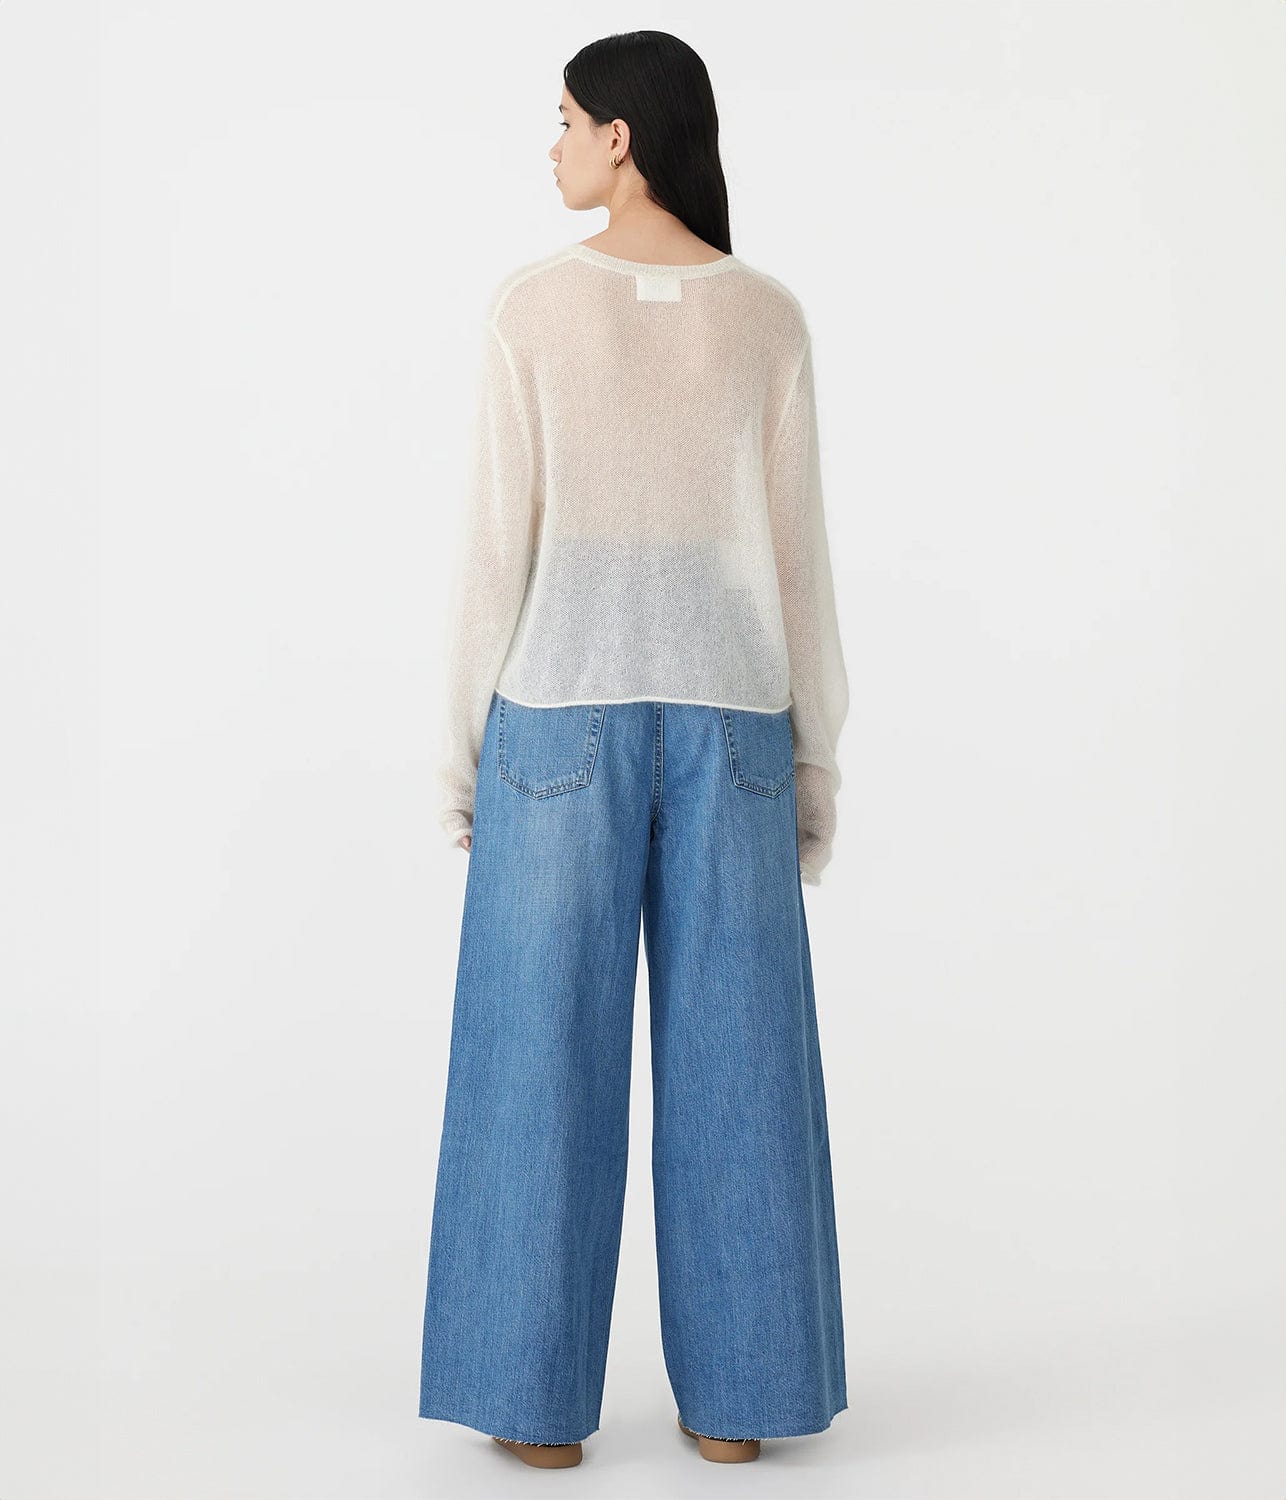 SUPERFINE MOHAIR CROPPED KNIT- NATURAL | BASSIKE |  BASSIKE SUPERFINE MOHAIR CROPPED KNIT- NATURAL